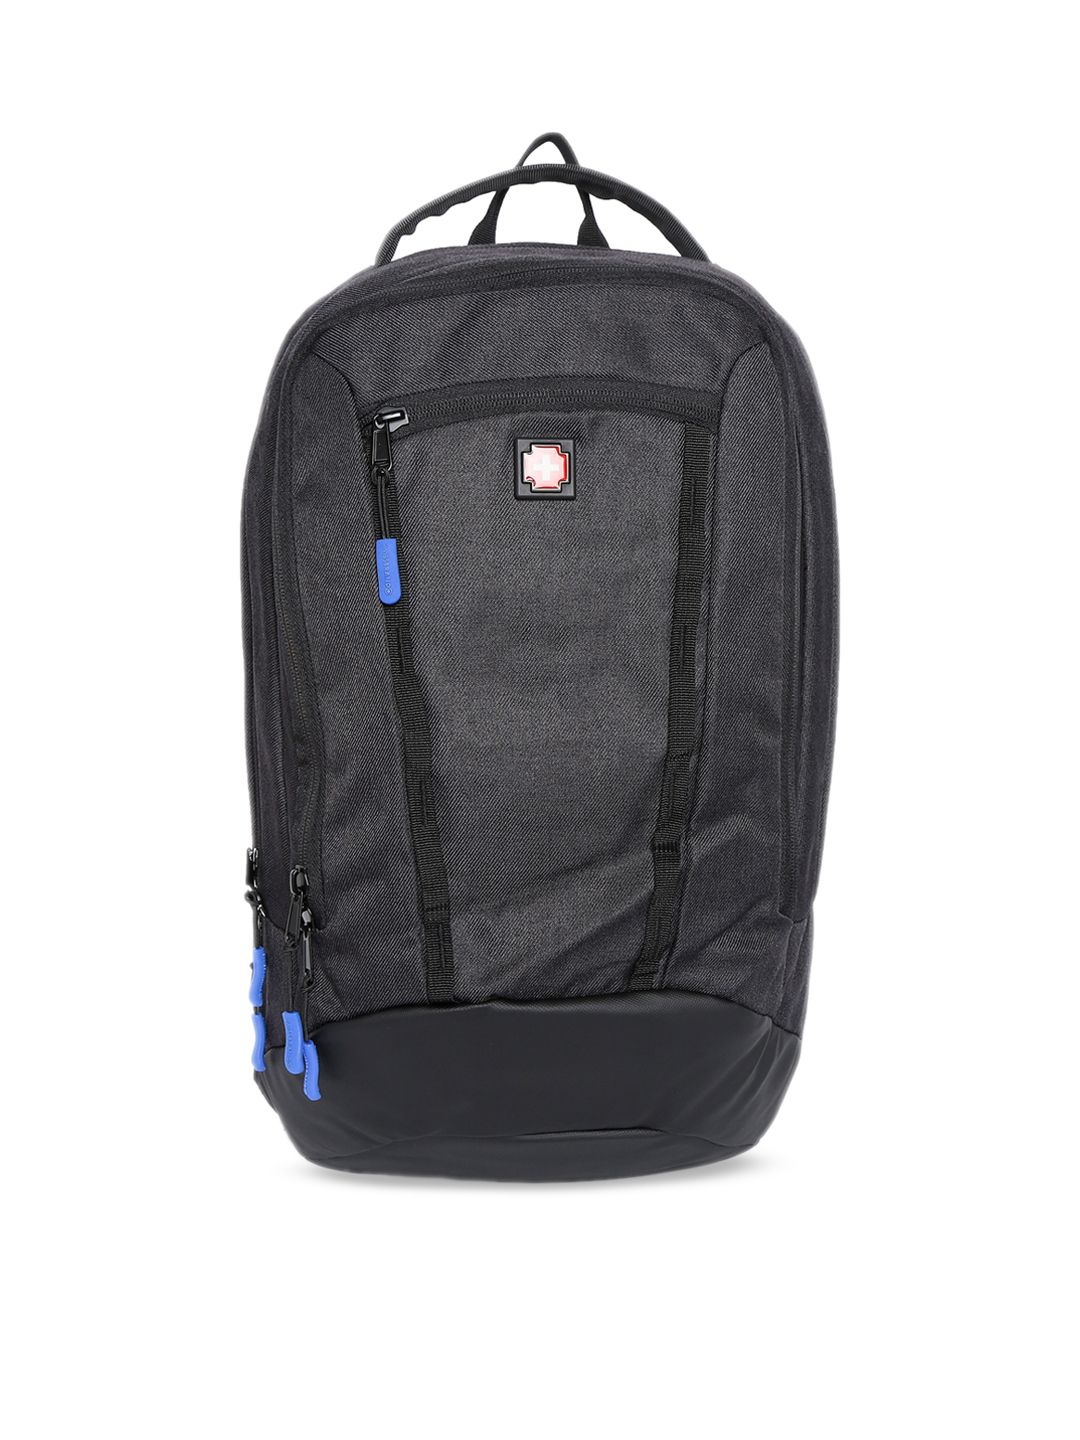 SWISS BRAND Unisex Black Solid Backpack Price in India